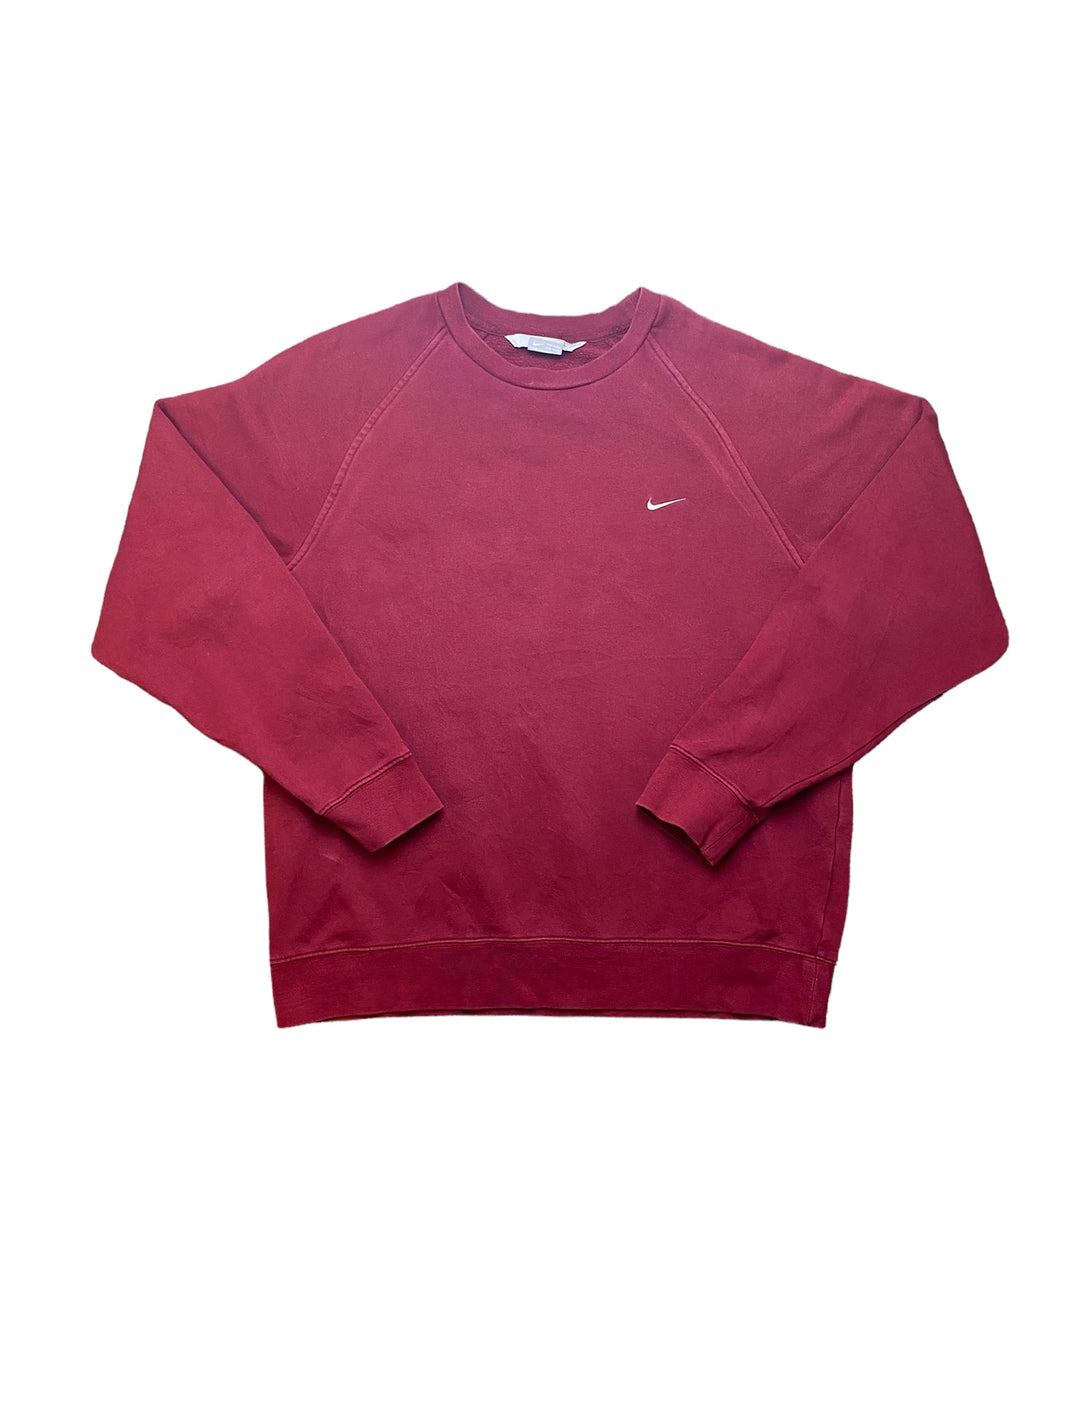 Nike Sweater embroidered